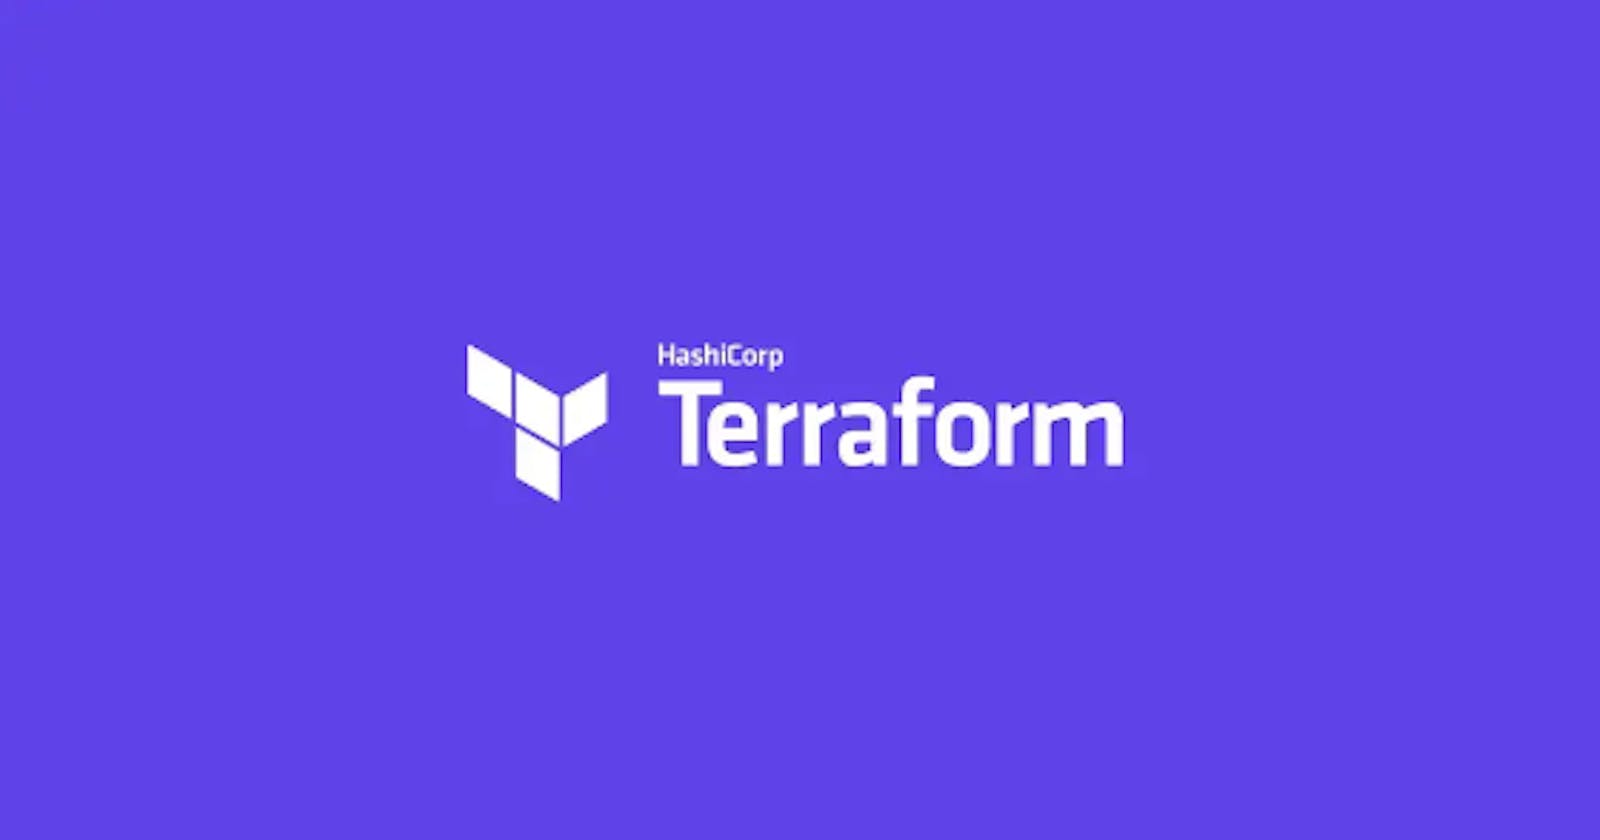 Provisioning AWS Infrastructure with Terraform: Creating EC2 Instances, S3 Buckets, and DynamoDB